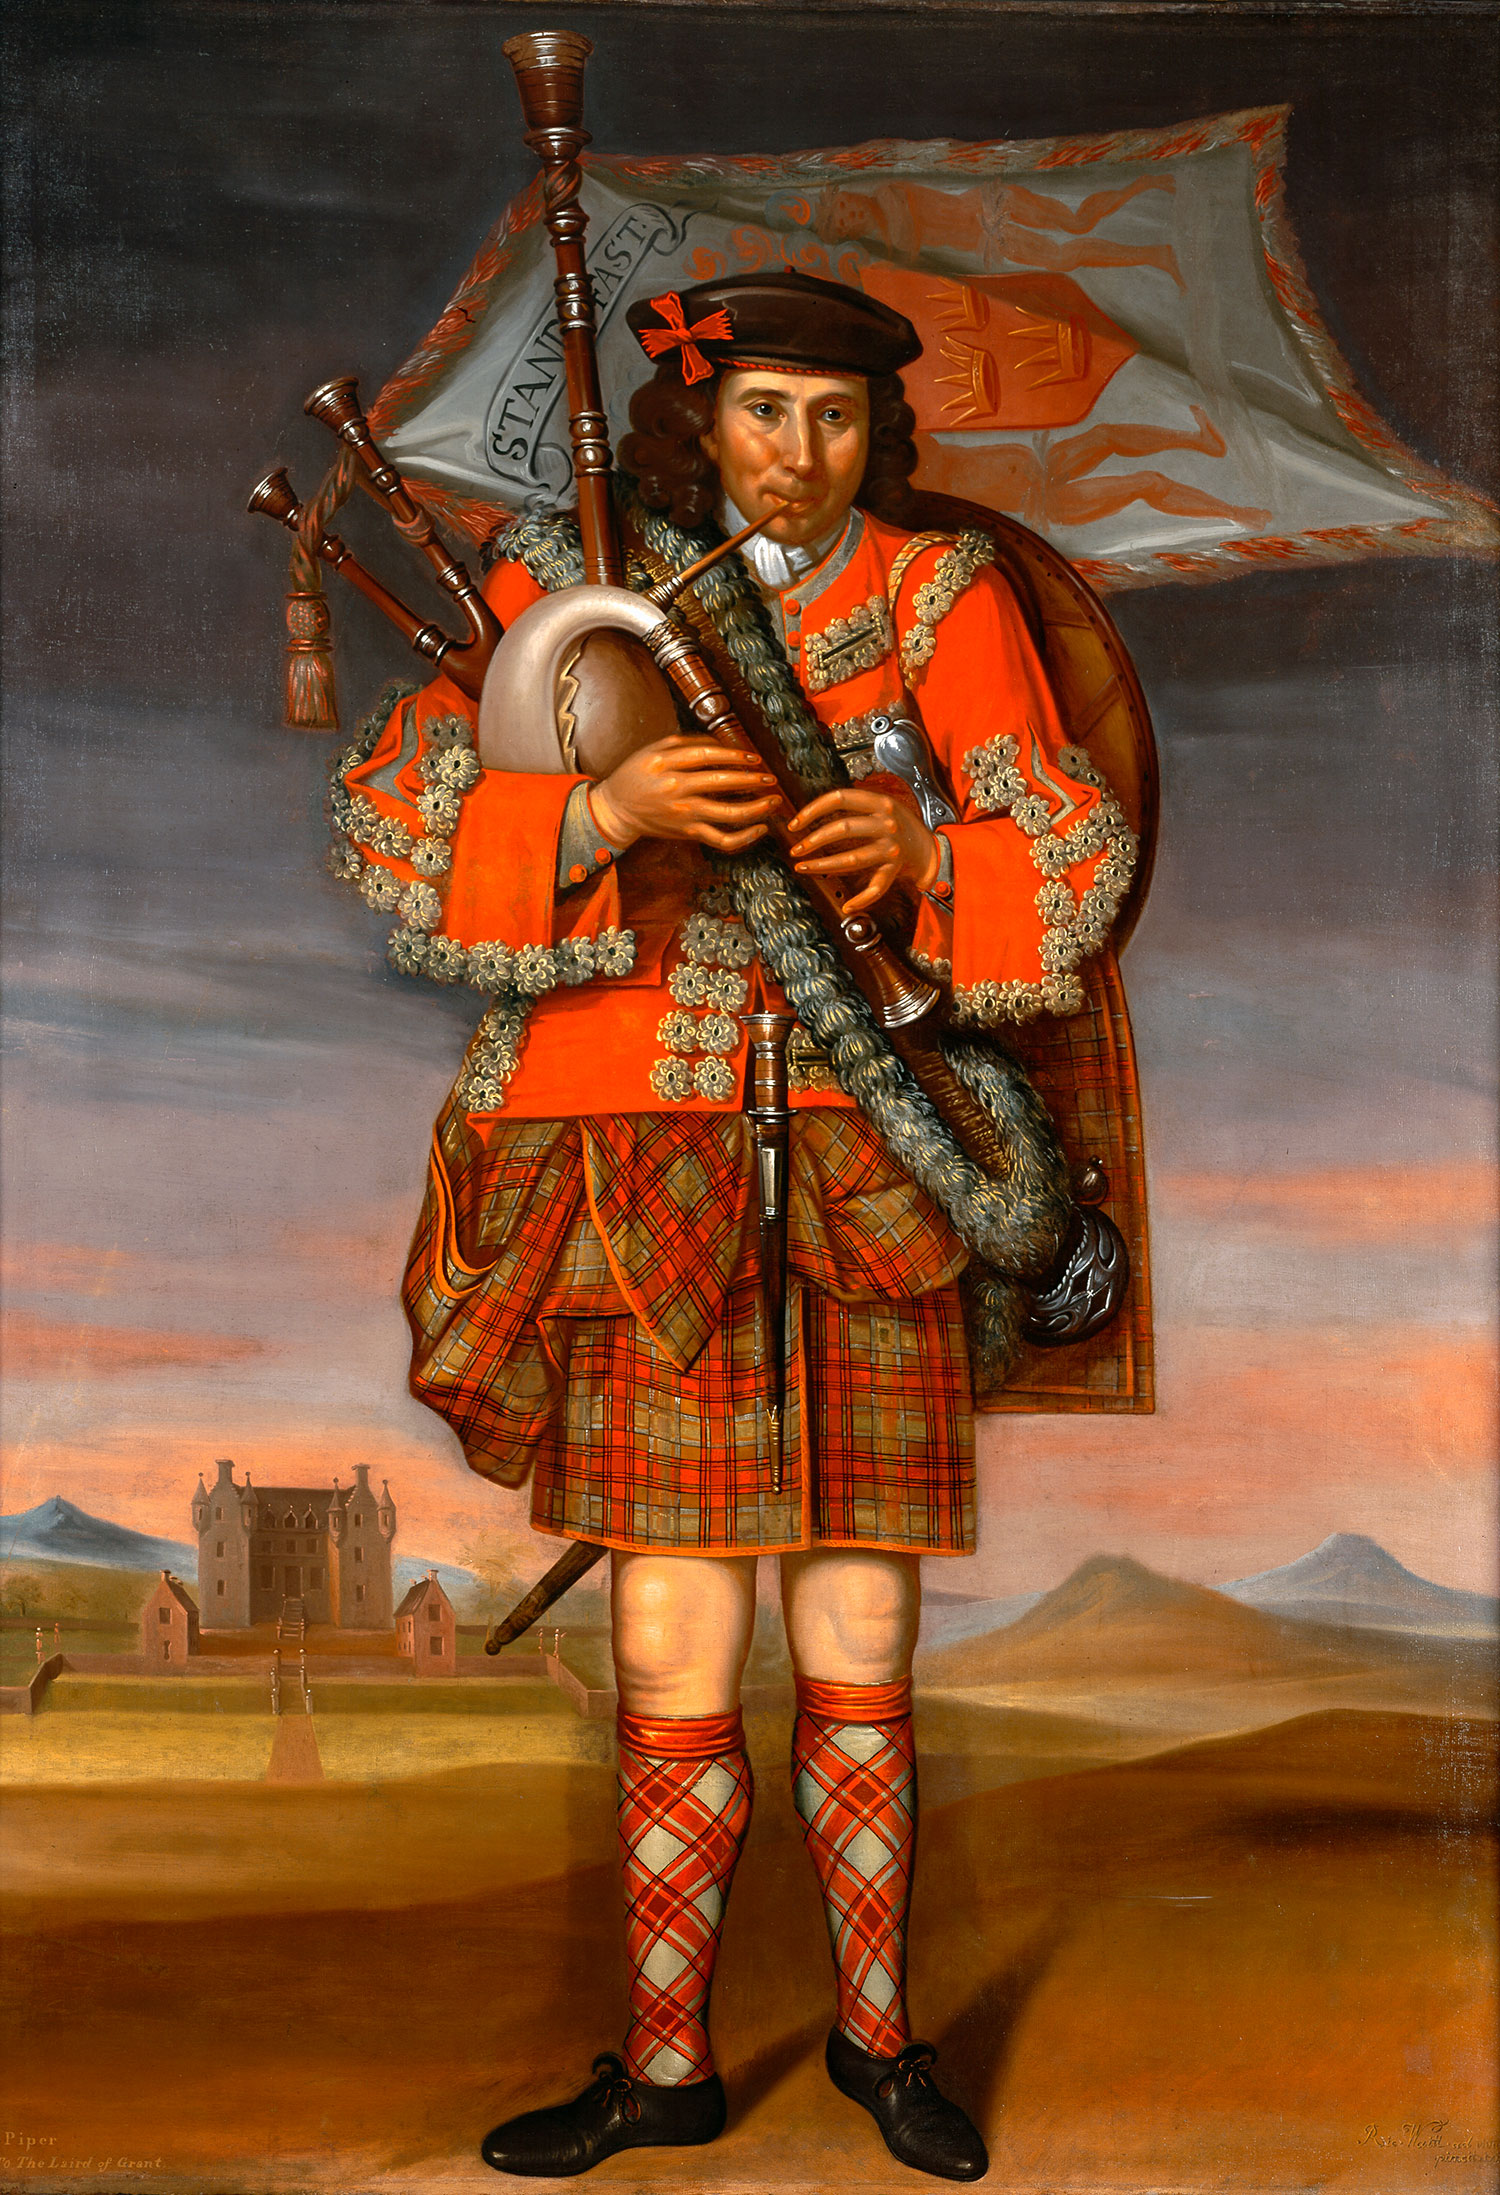 Painting of the Laird of Grant's Piper, William Cumming by Richard Waitt, 1714.